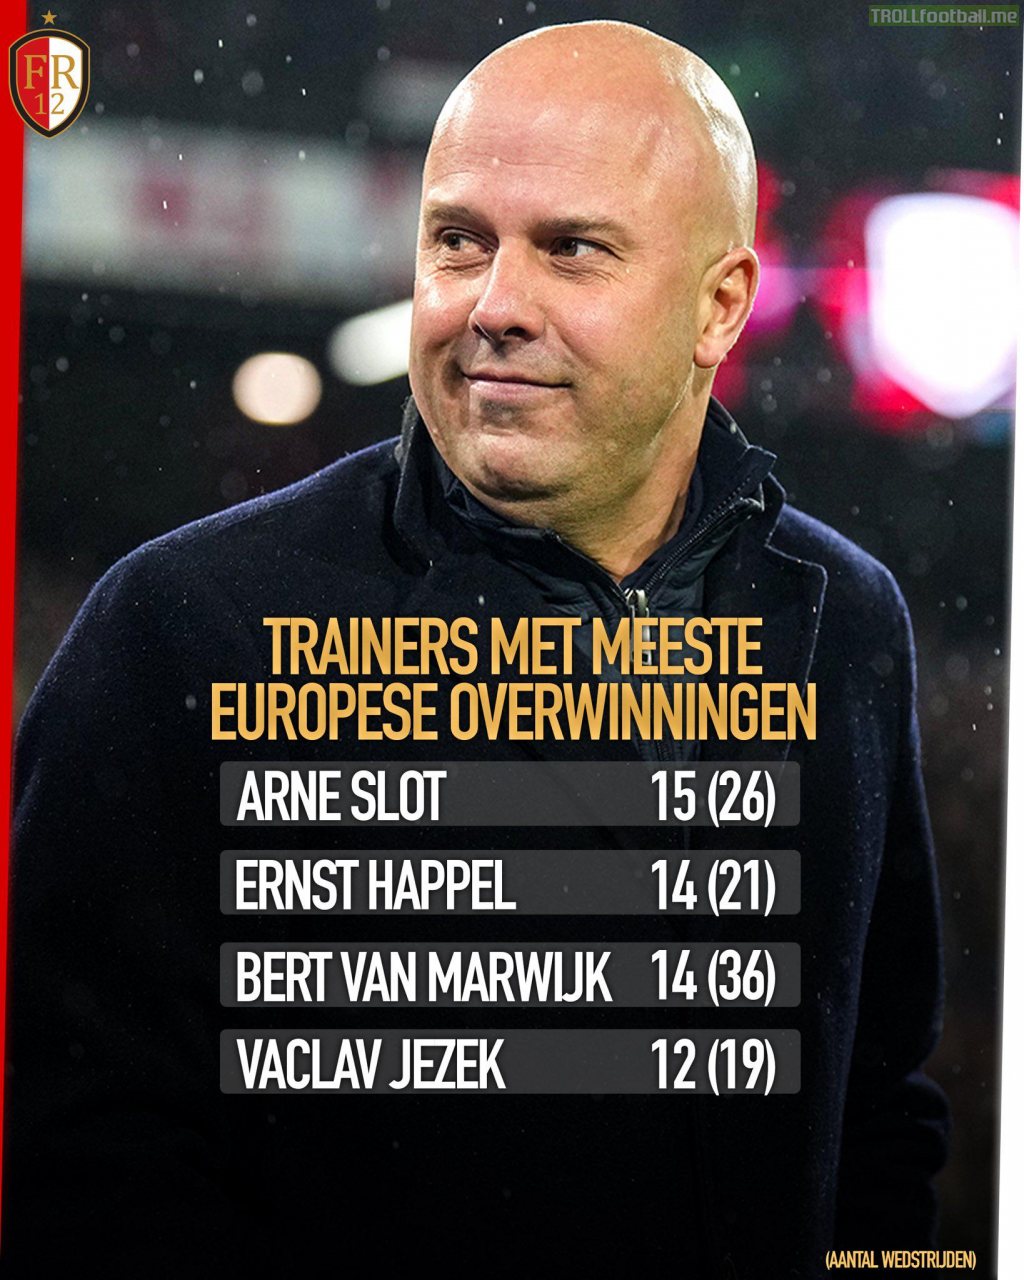 Arne Slot now has the most European wins out of all Feyenoord managers with 15 victories